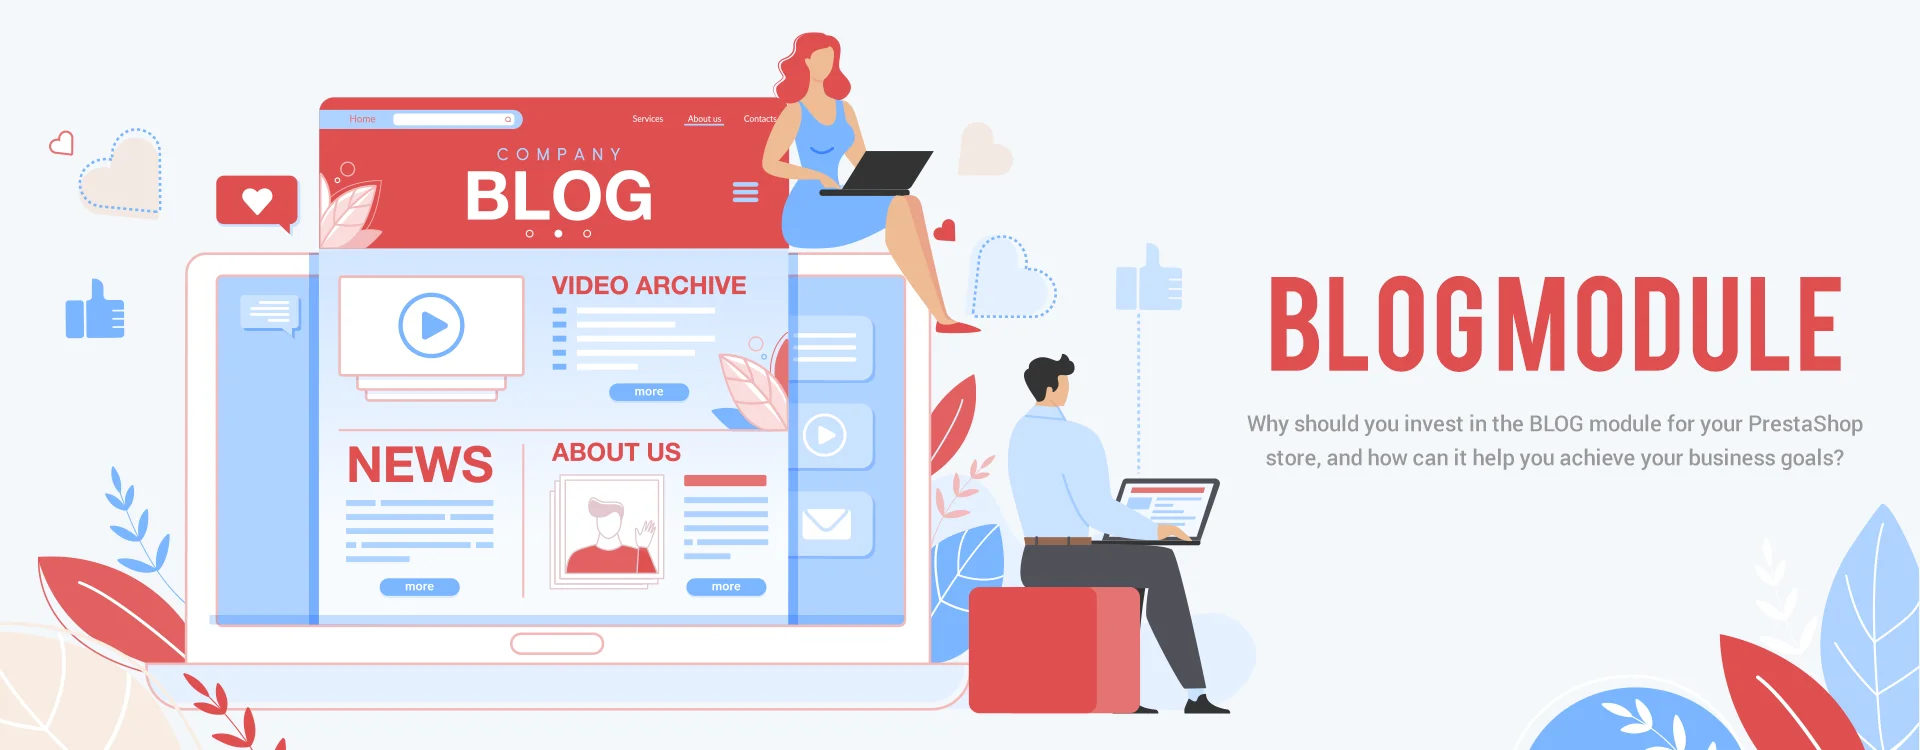 Why should you invest in the BLOG module for your PrestaShop store, and how can it help you achieve your business goals?